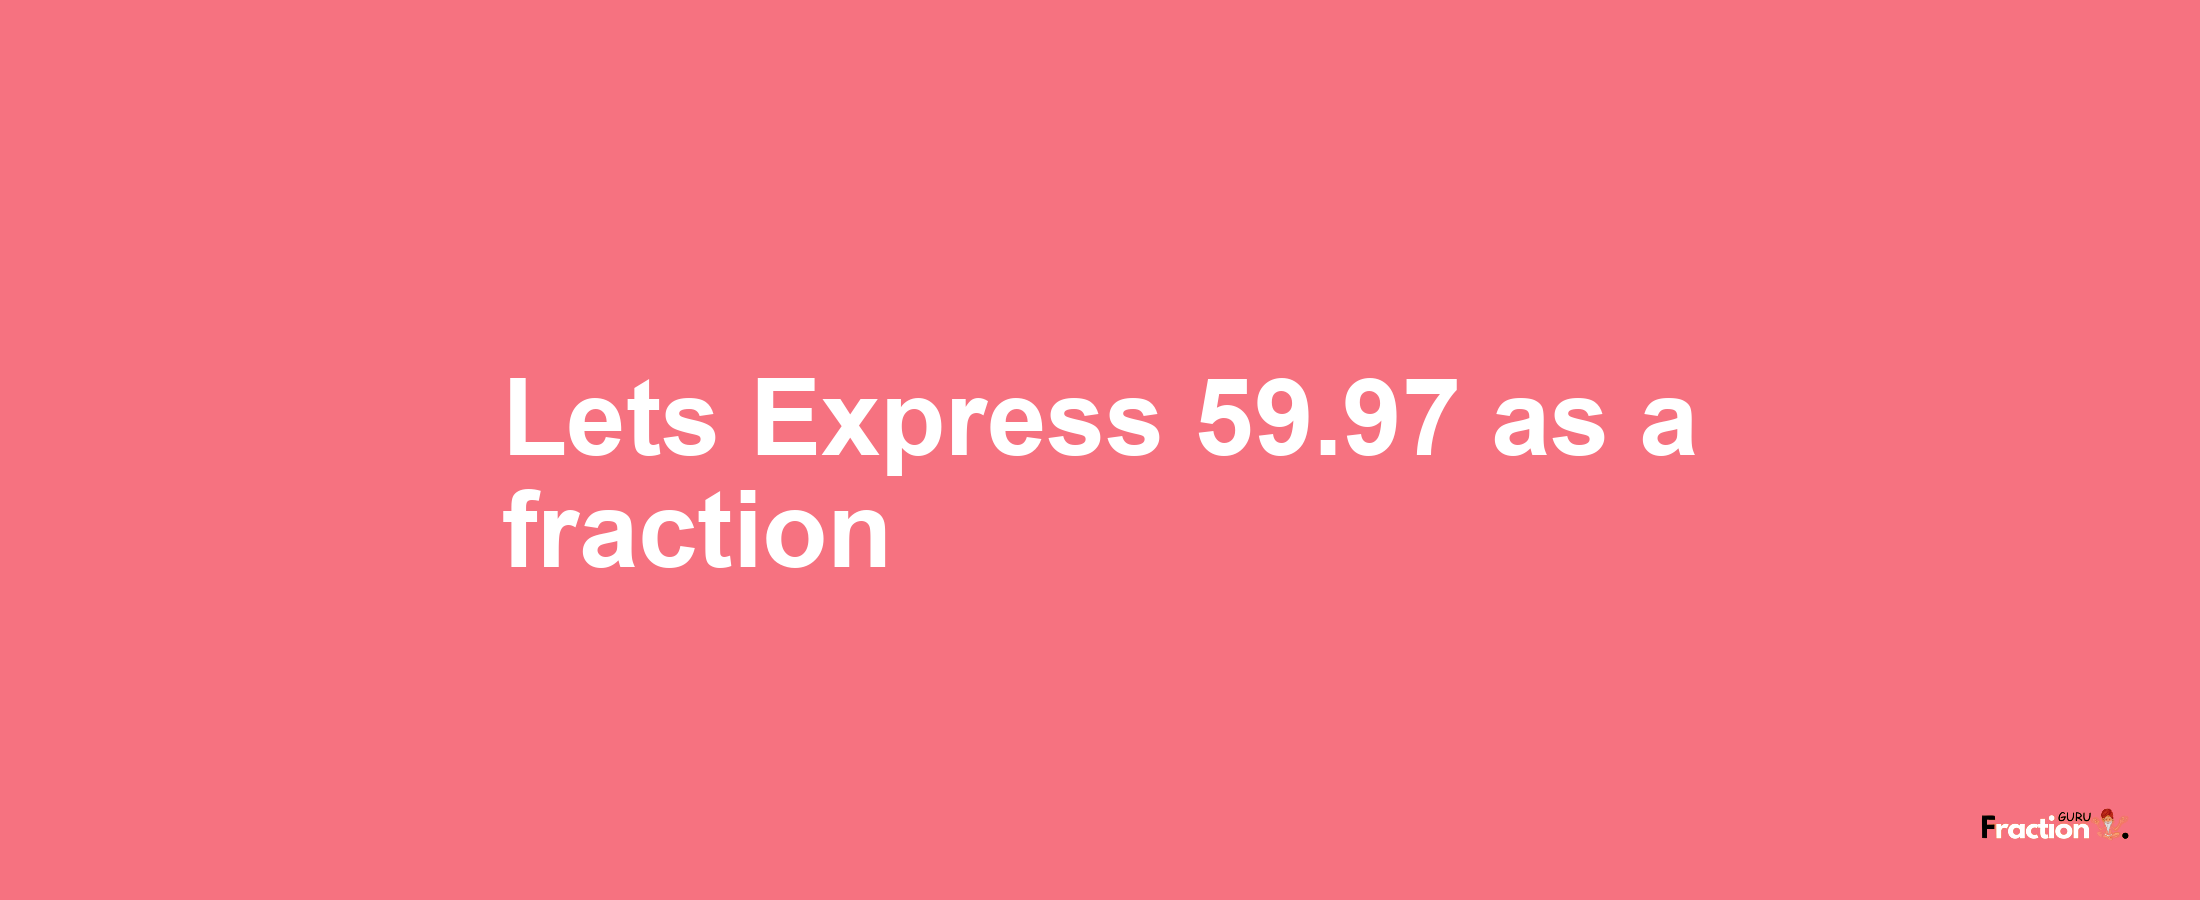 Lets Express 59.97 as afraction